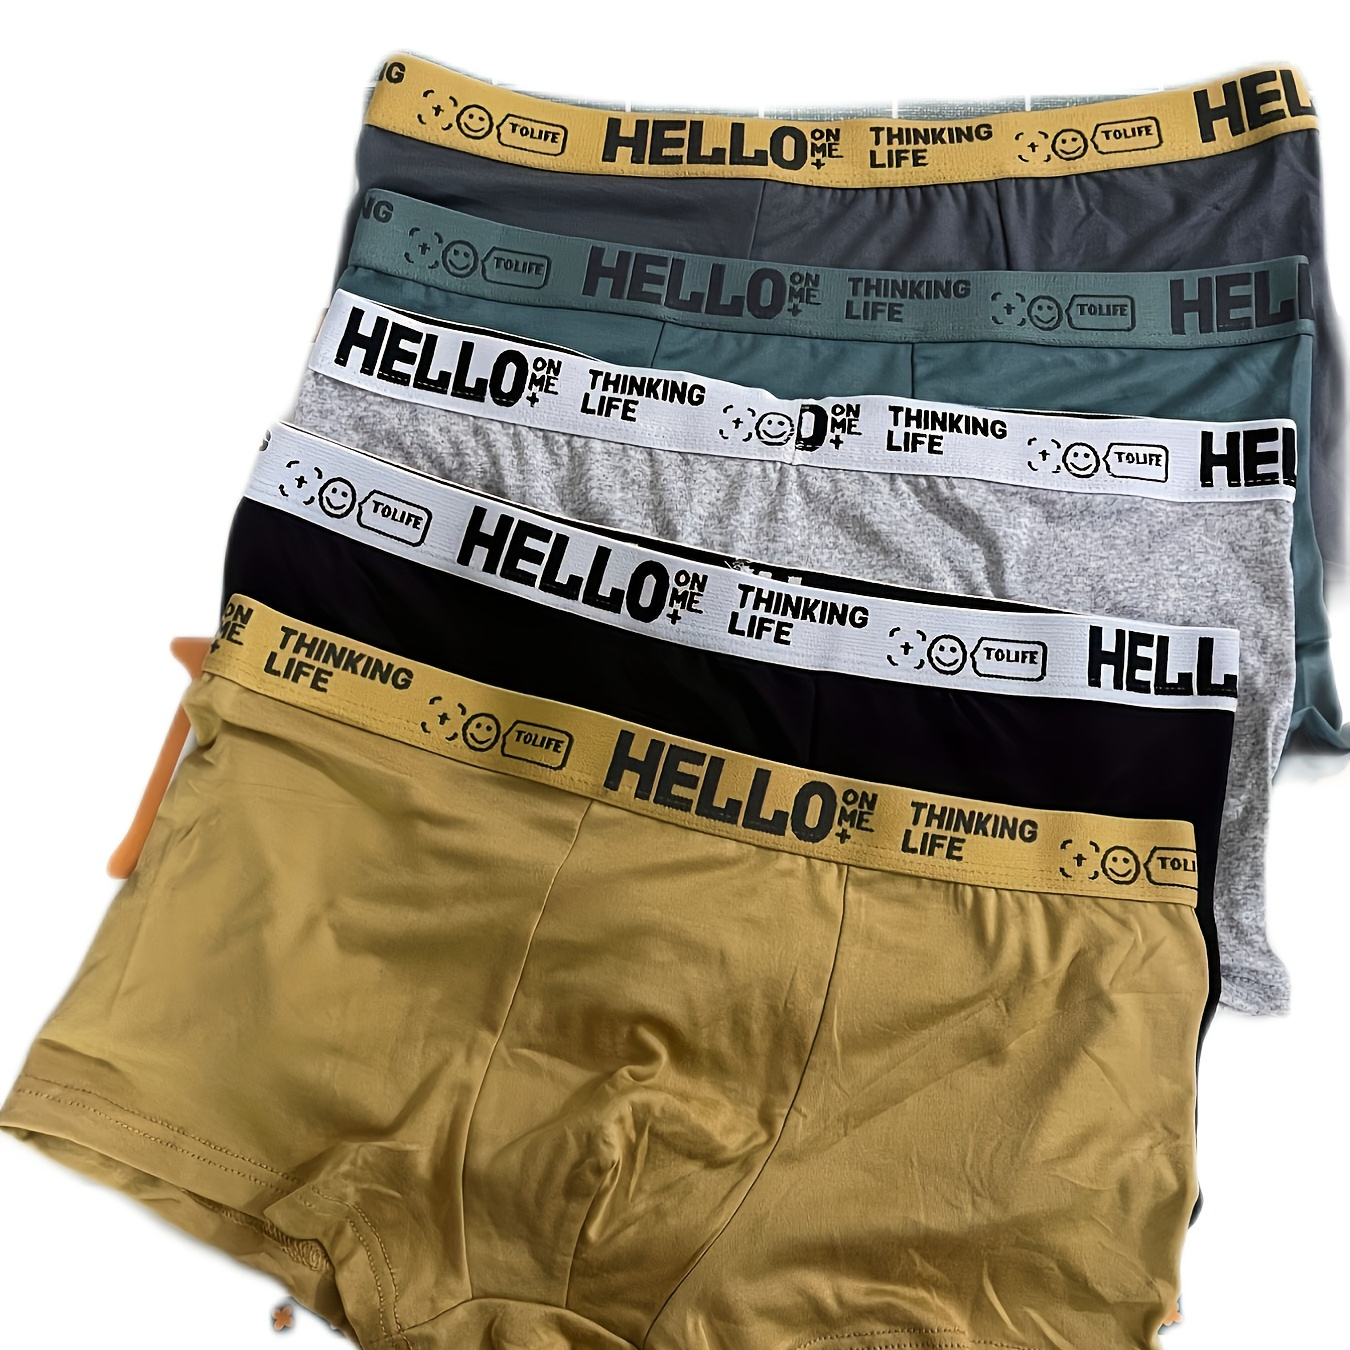 

5pcs Men's Trendy Underwear, Breathable Soft Comfy Quick Drying Stretchy Boxer Briefs Trunks